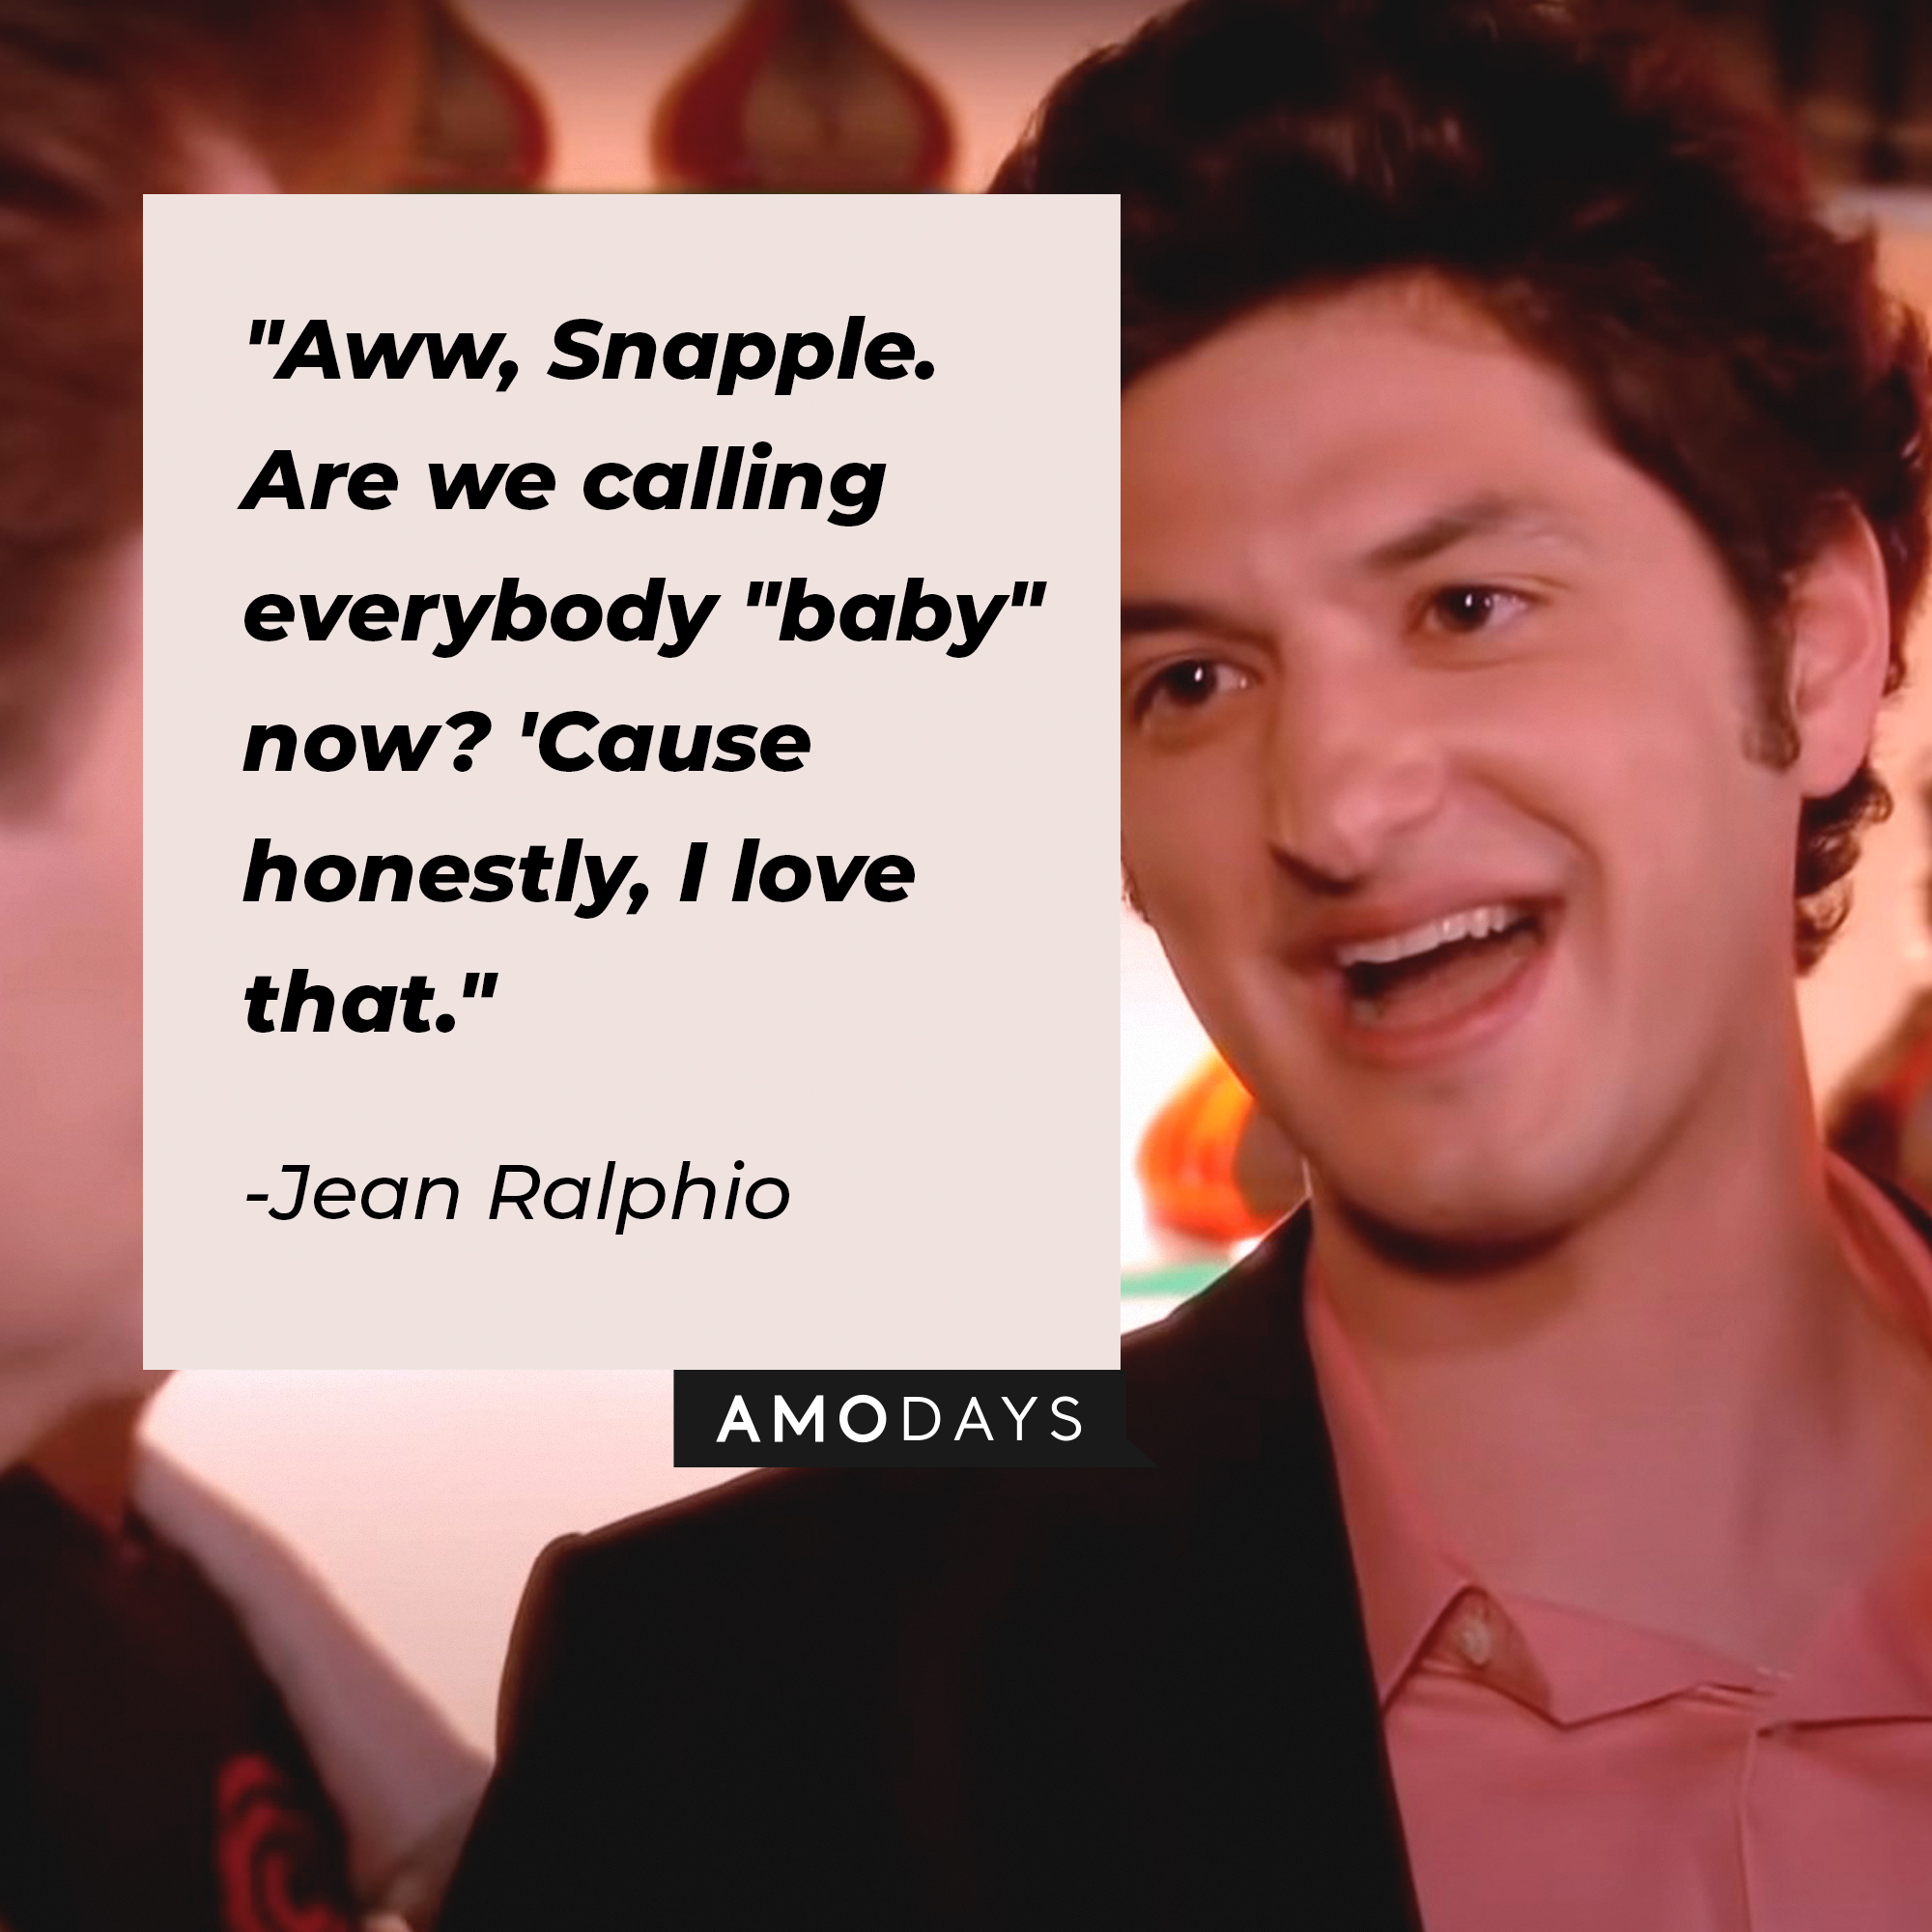 Jean Ralphio's quote: "Aww, Snapple. Are we calling everybody "baby" now? 'Cause honestly, I love that." | Source: Facebook.com/parksandrecreation